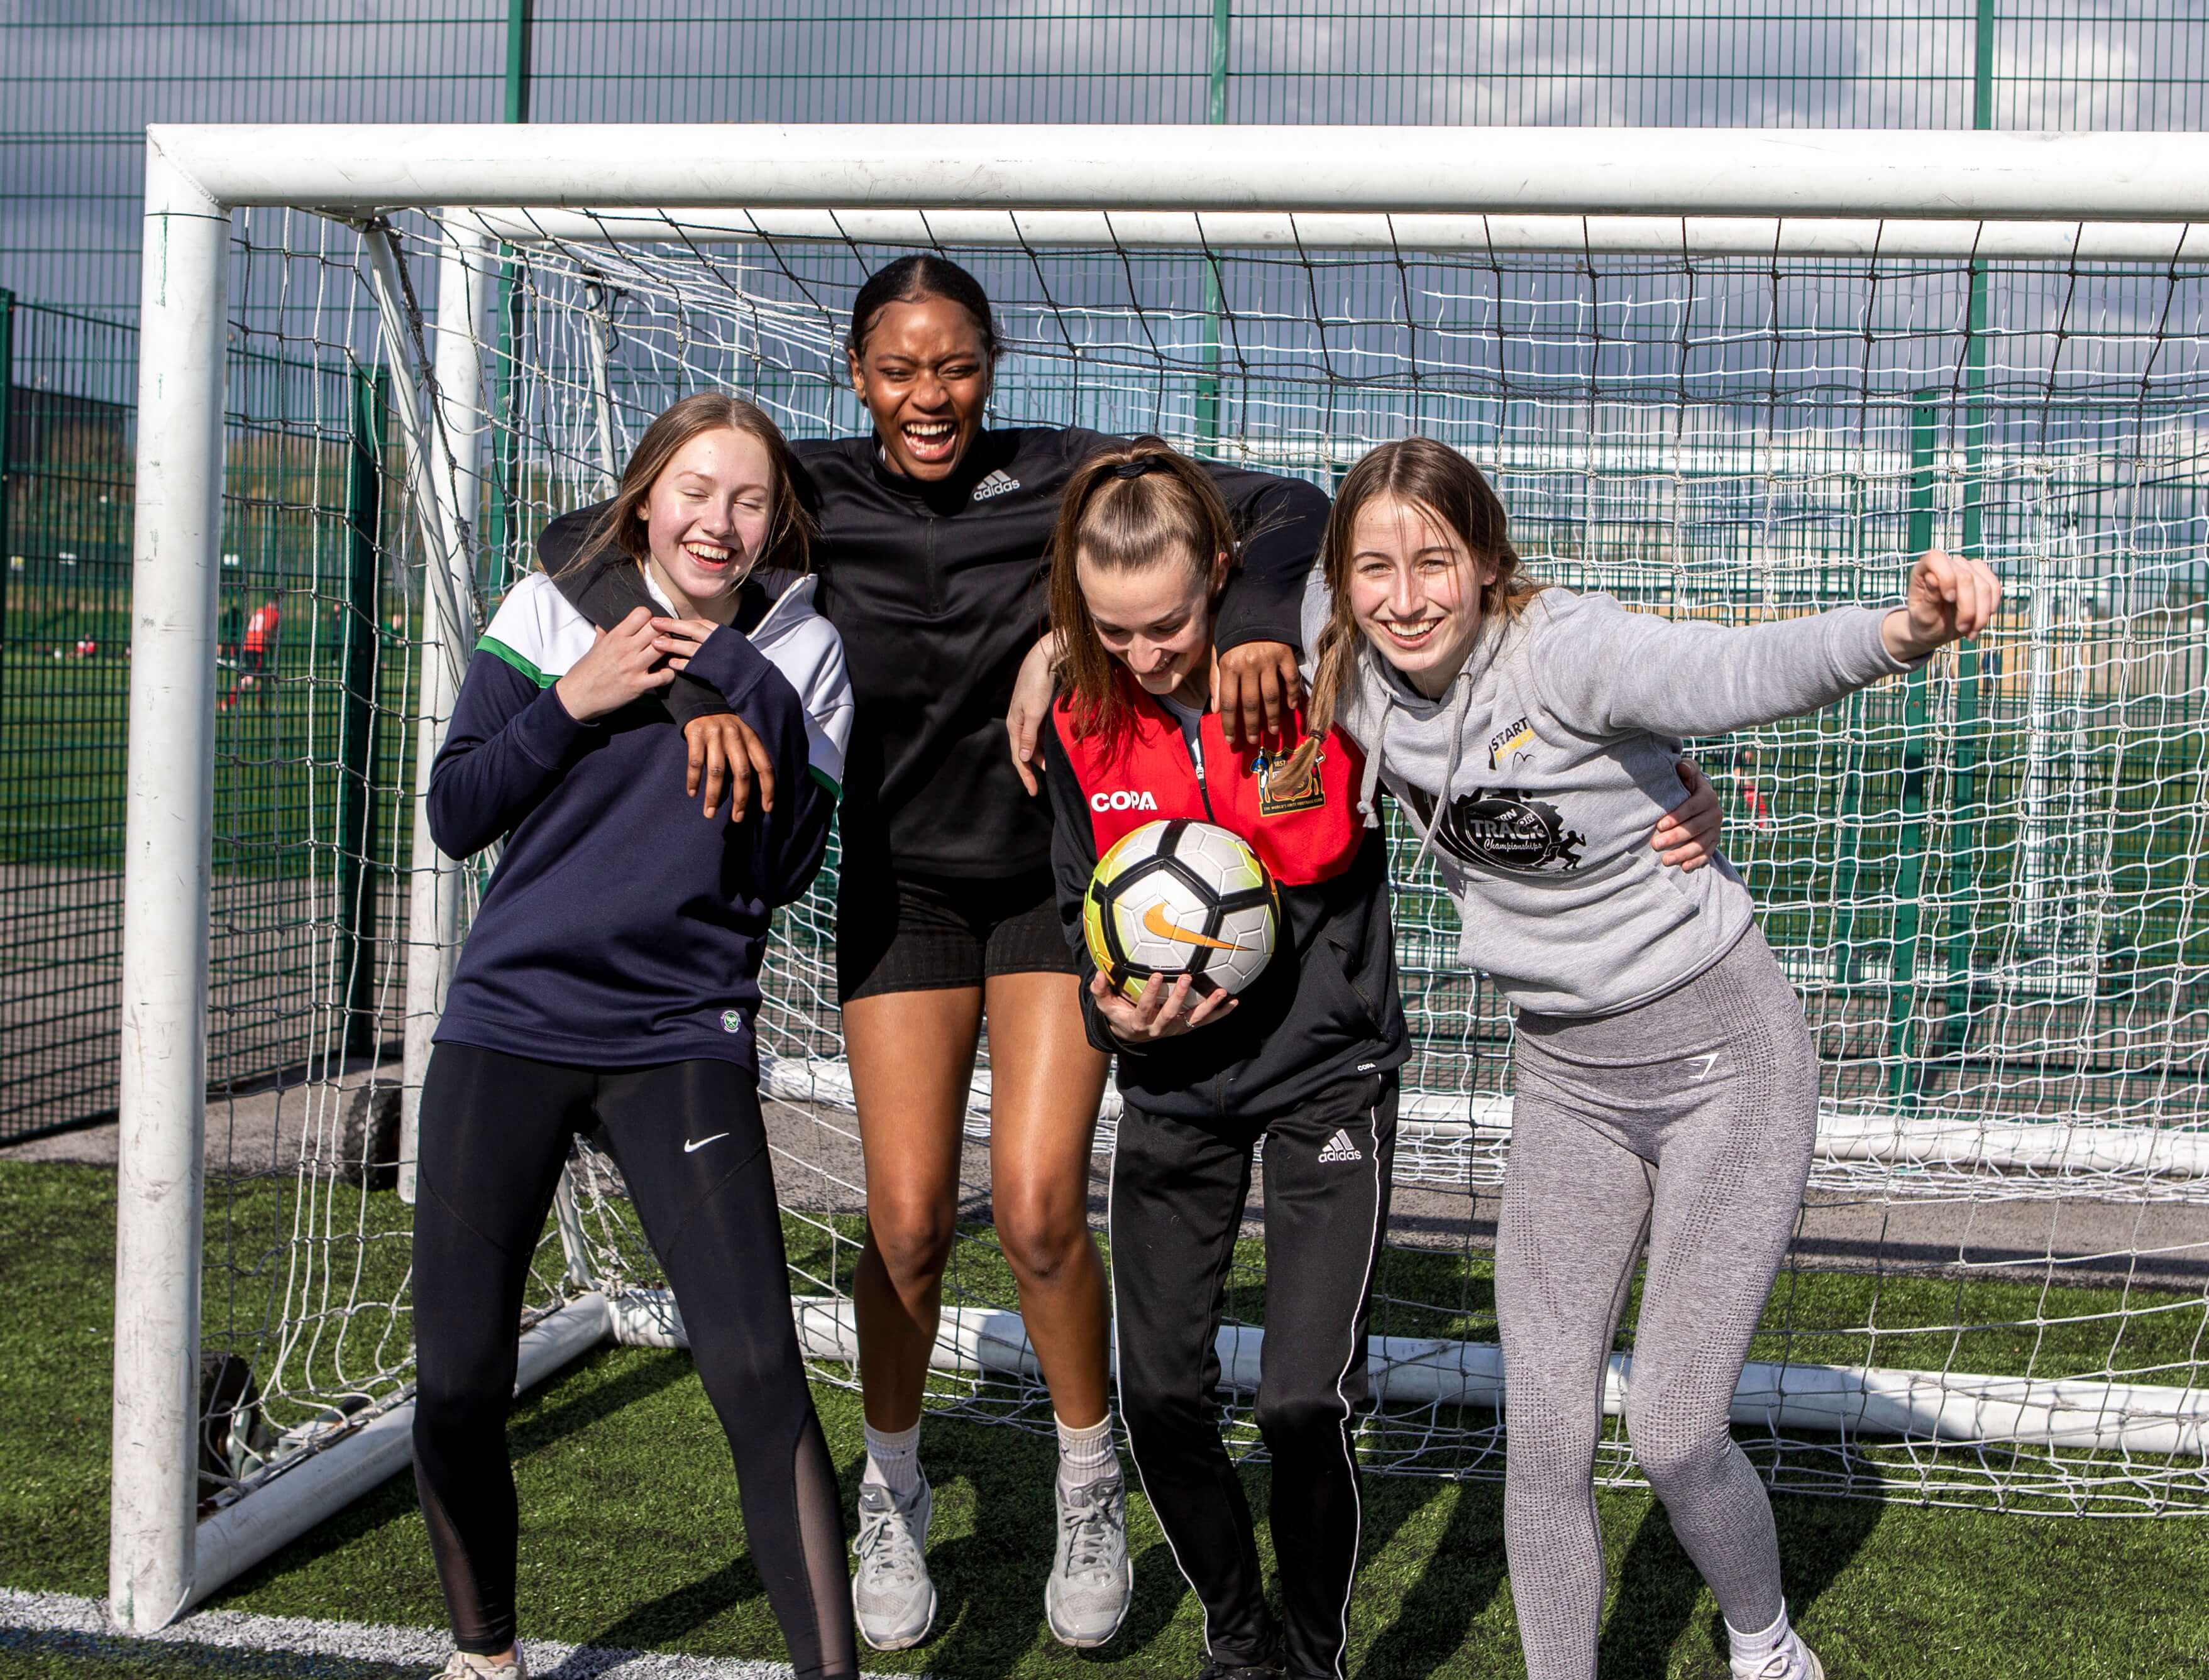 Girls laughing together at a session, one holding a football